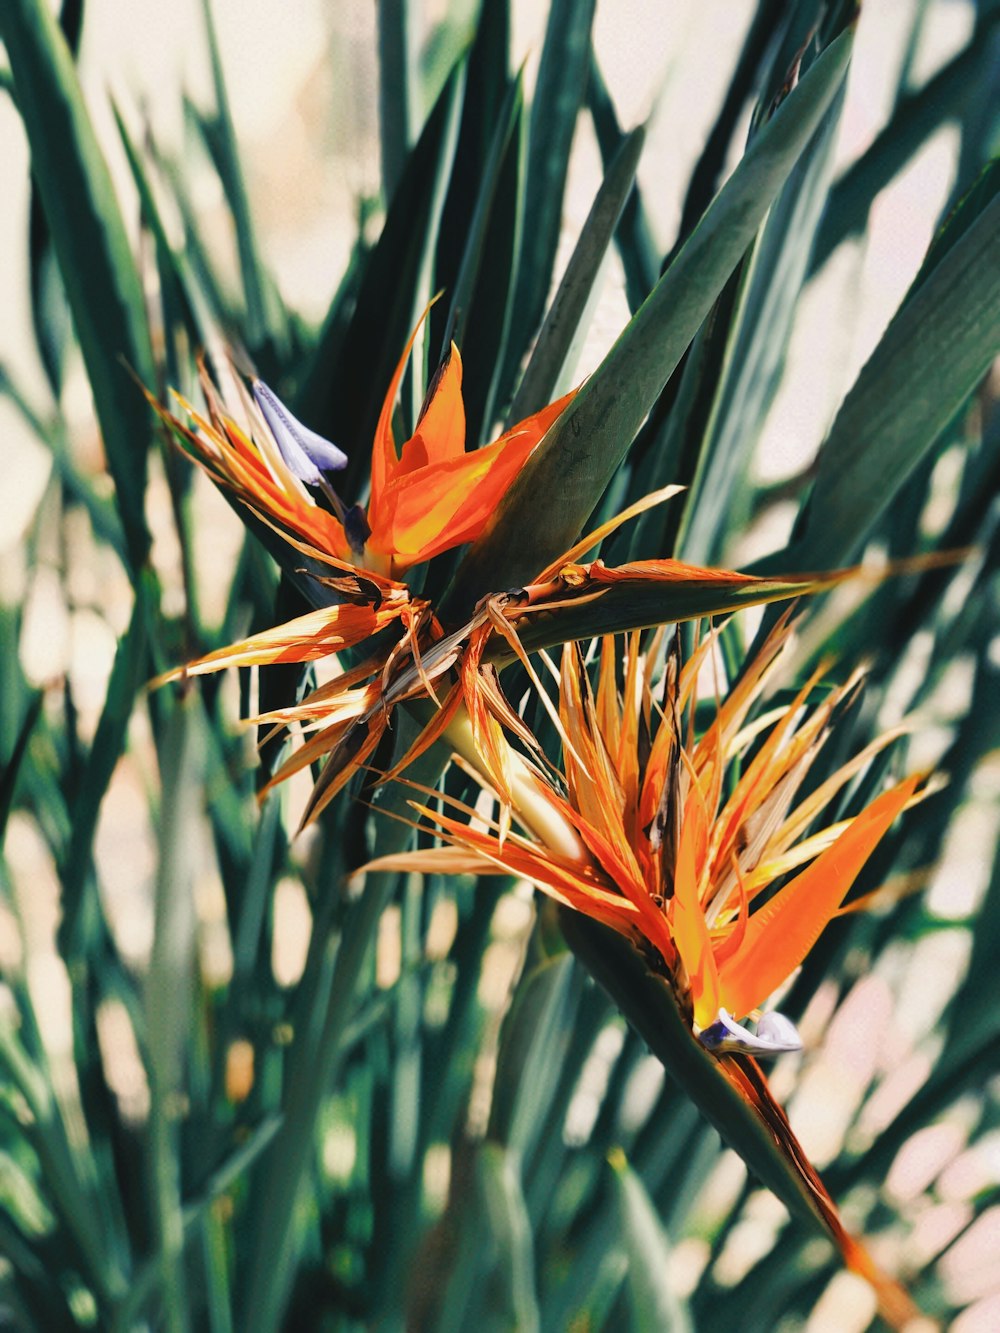 orange and blue birds of paradise flower in bloom during daytime